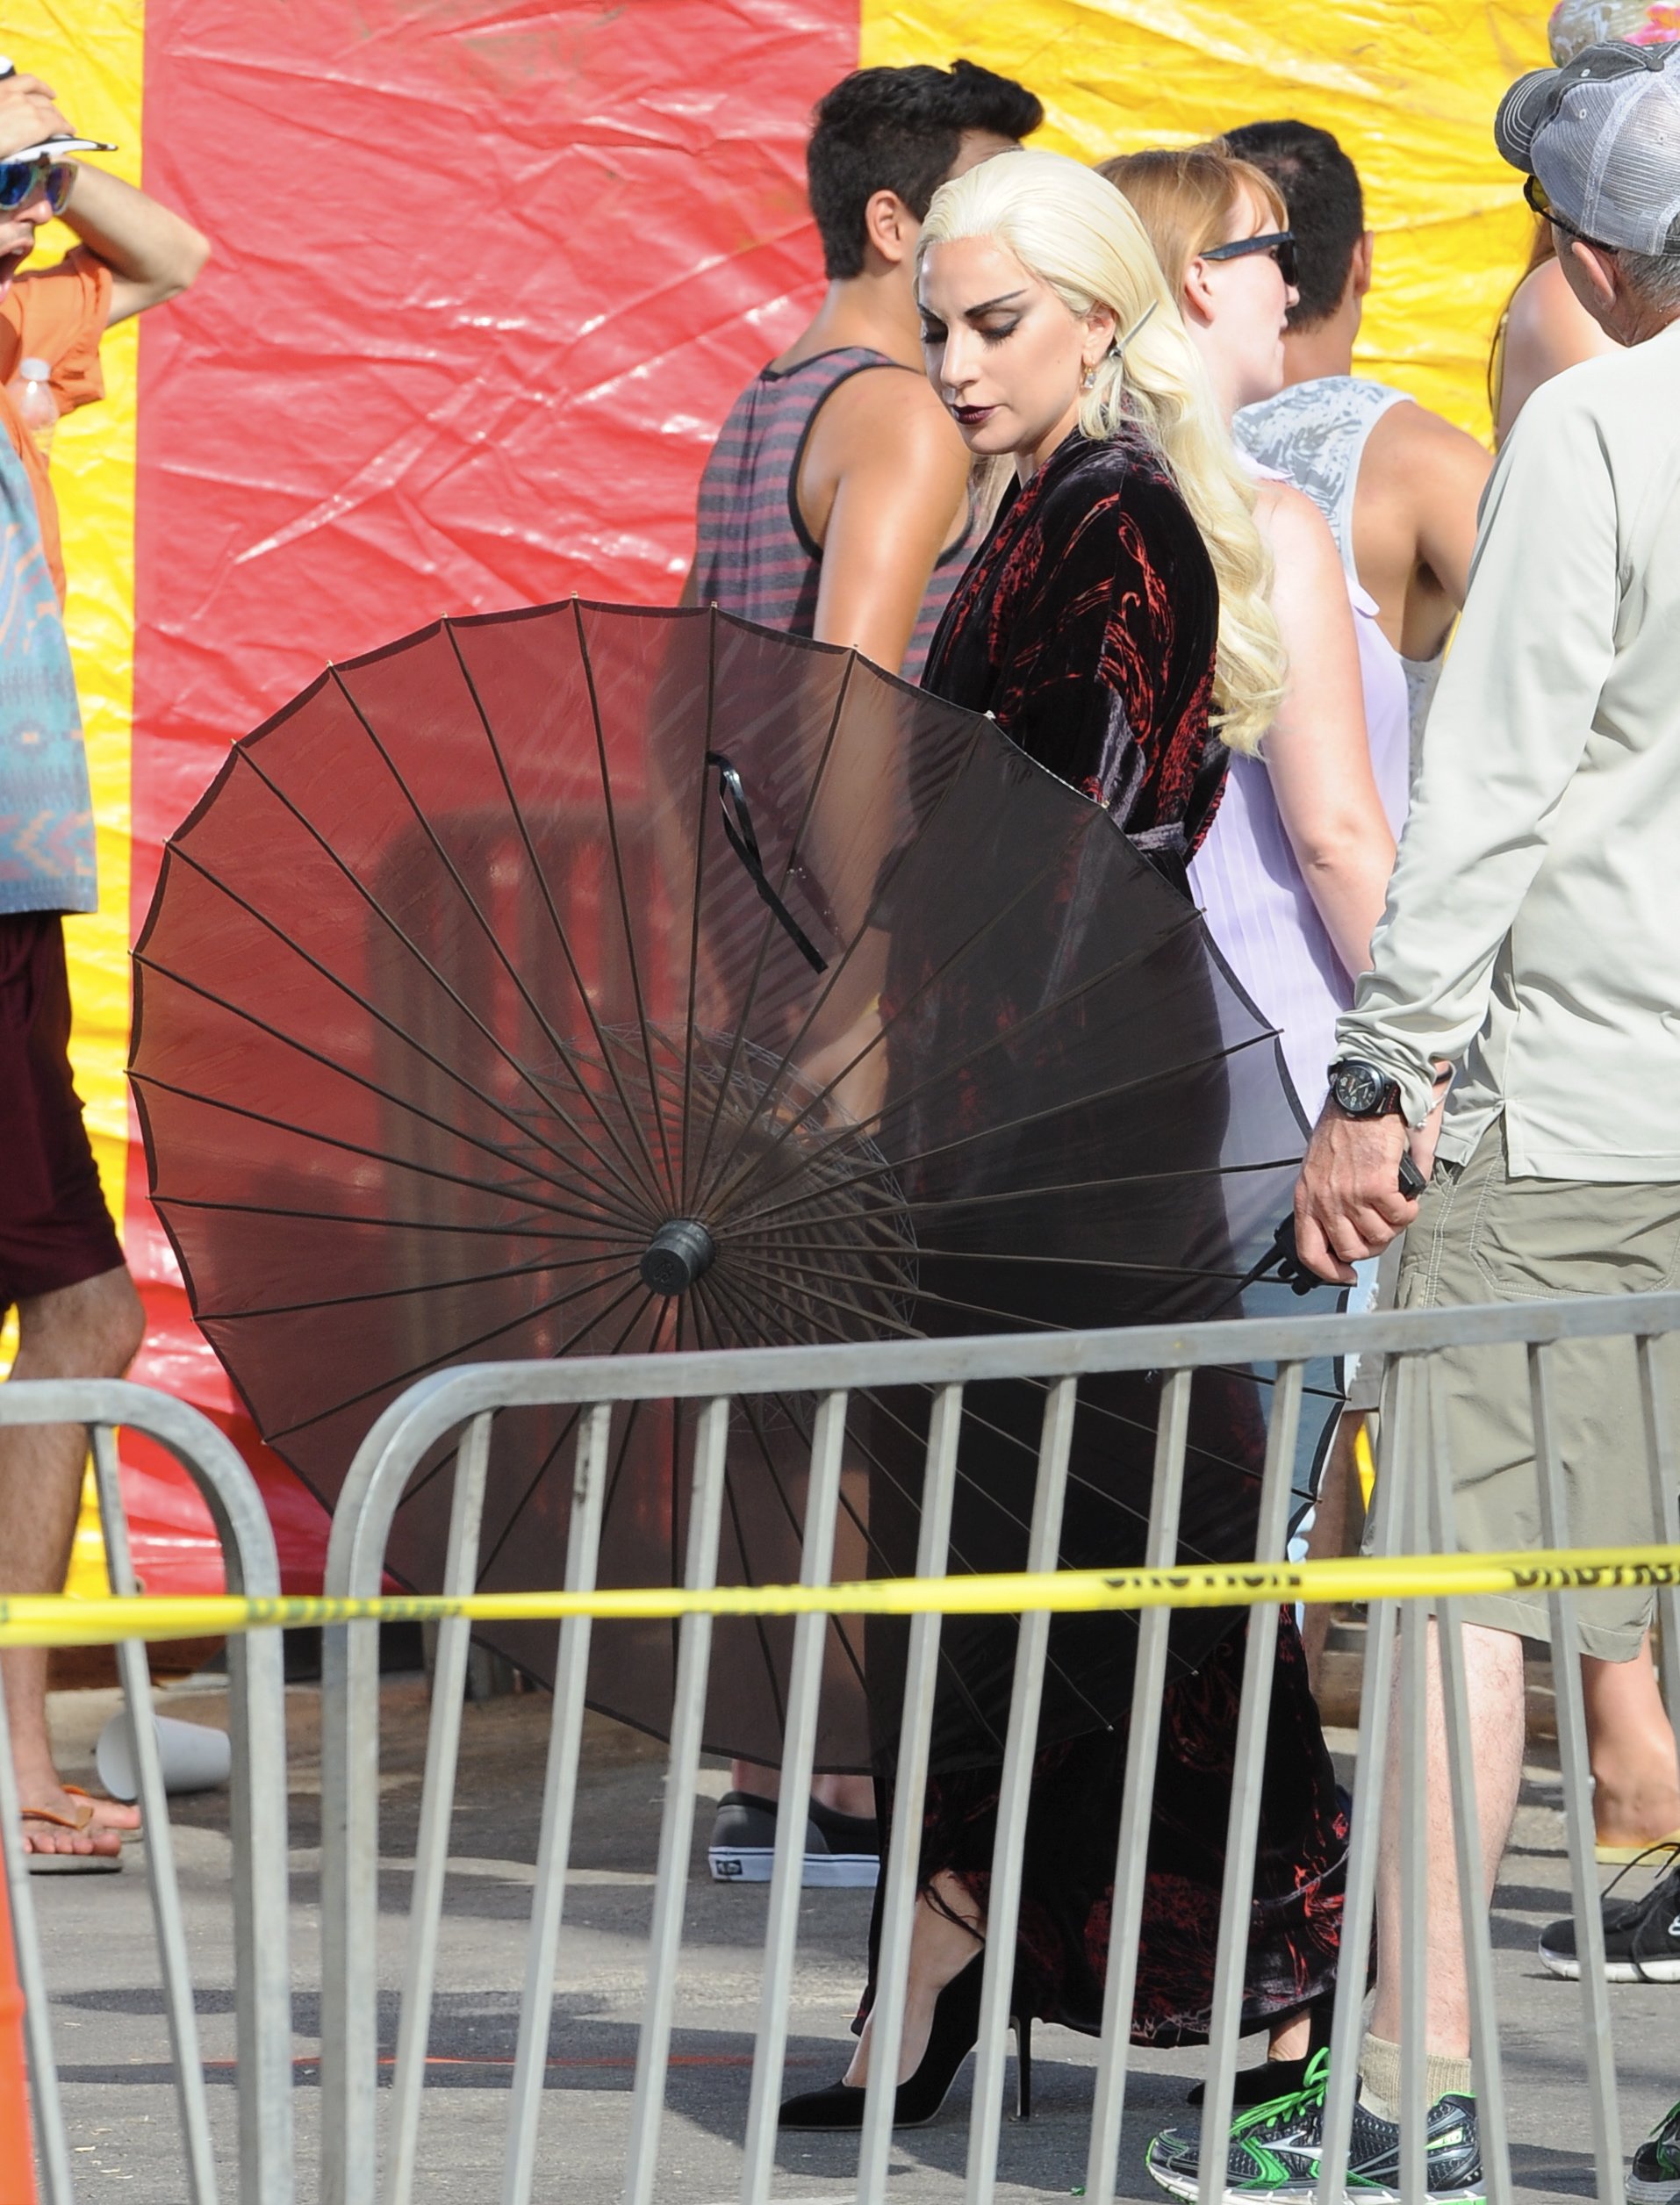 Countness Lady Gaga dress in all black for a beach carnival scene in Santa Monica for "American Horror Story Hotel" with co star Wes Bentley. The singer walk around the sand with black heels in a scorching hot day but had help with umbrellas and water fan for the crew.

Featuring: Lady Gaga
Where: Santa Monica, California, United States
When: 10 Sep 2015
Credit: Cousart/JFXimages/WENN.com
Countness Lady Gaga dress in all black for a beach carnival scene in Santa Monica for "American Horror Story Hotel" with co star Wes Bentley. The singer walk around the sand with black heels in a scorching hot day but had help with umbrellas and water fan for the crew.

Featuring: Lady Gaga
Where: Santa Monica, California, United States
When: 10 Sep 2015
Credit: Cousart/JFXimages/WENN.com